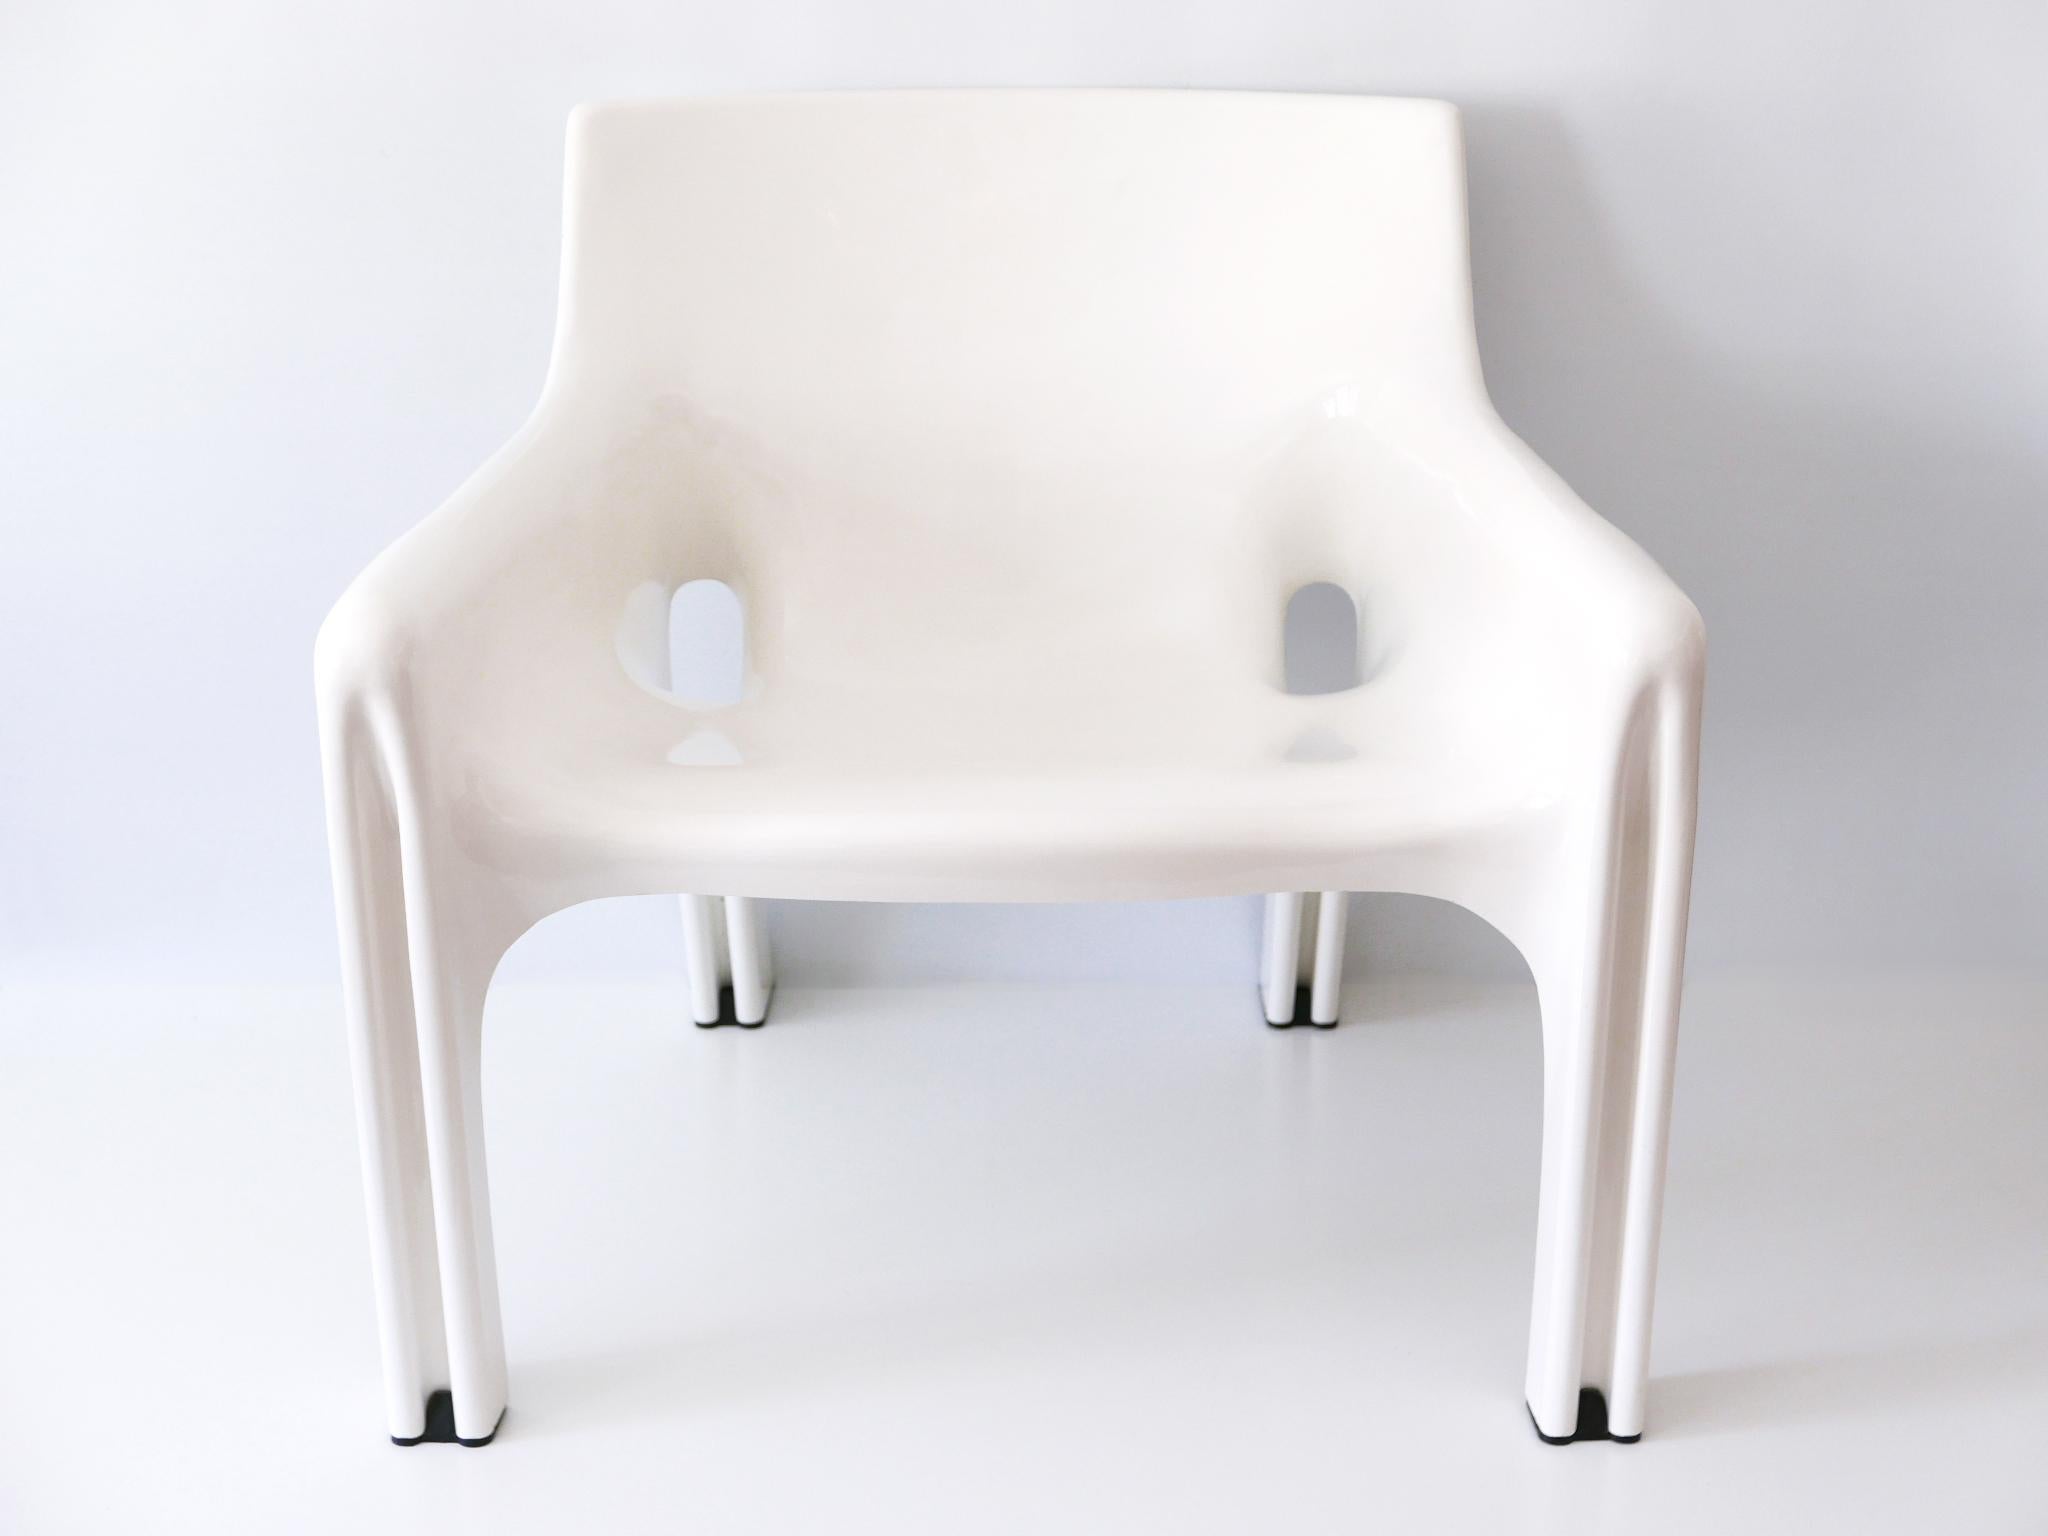 Original, elegant and comfortable Mid-Century Modern armchair or lounge chair 'Vicario'. Designed by Vico Magistretti, 1969. Manufactured by Artemide, Italy, 1970s. Marked beneath the underside of the seat.

Executed in glossy white colored